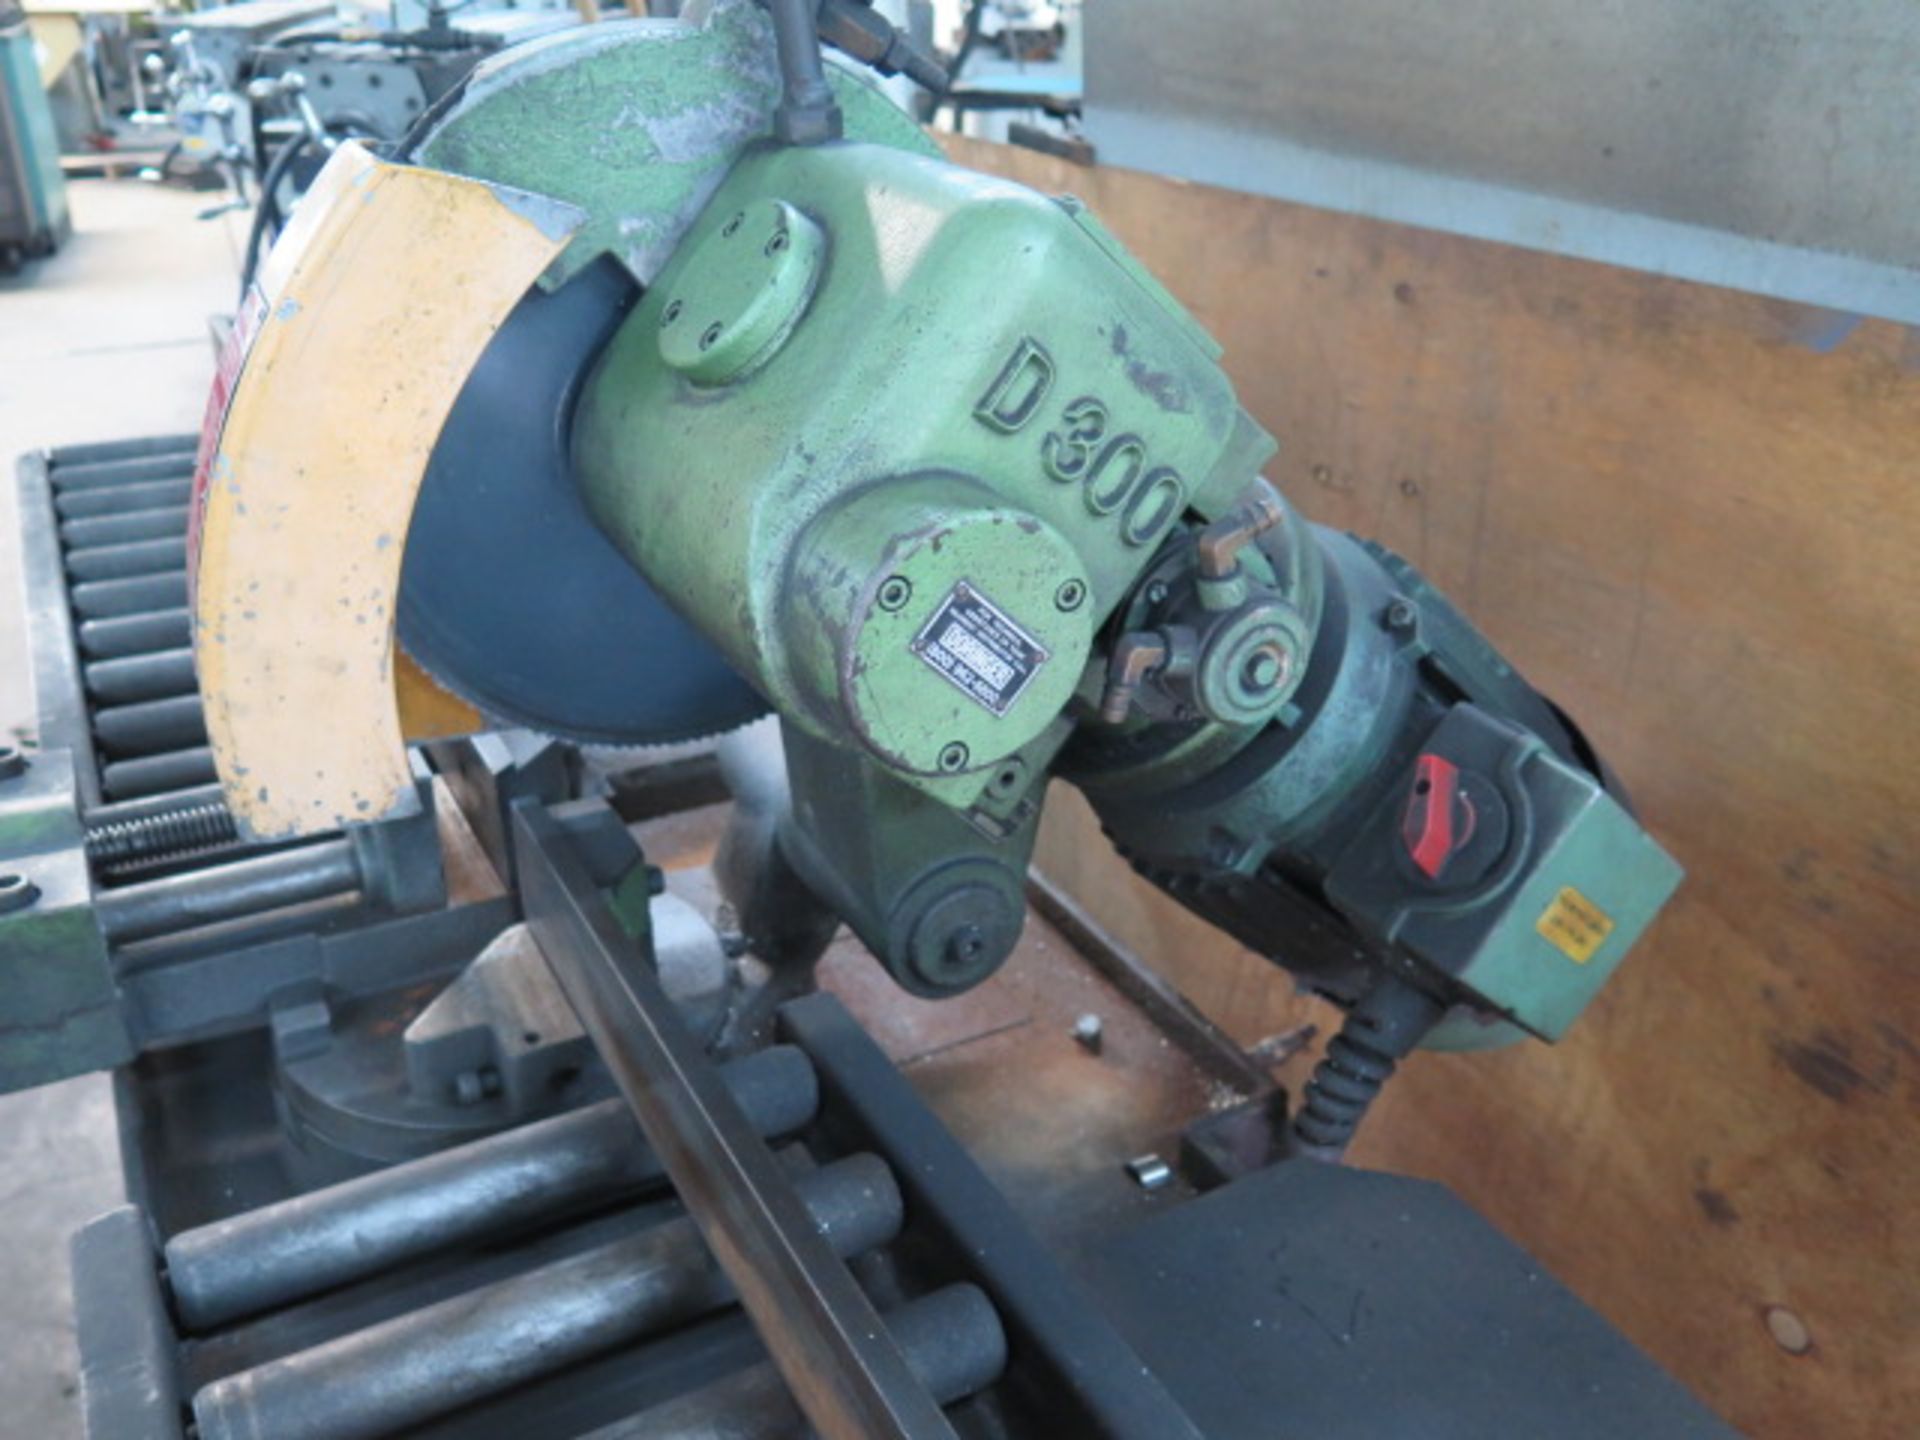 Doringer D-300 Miter Cold Saw s/n 18417 w/ 2-Speeds, Speed Clamping, Extended Table, SOLD AS IS - Image 5 of 16